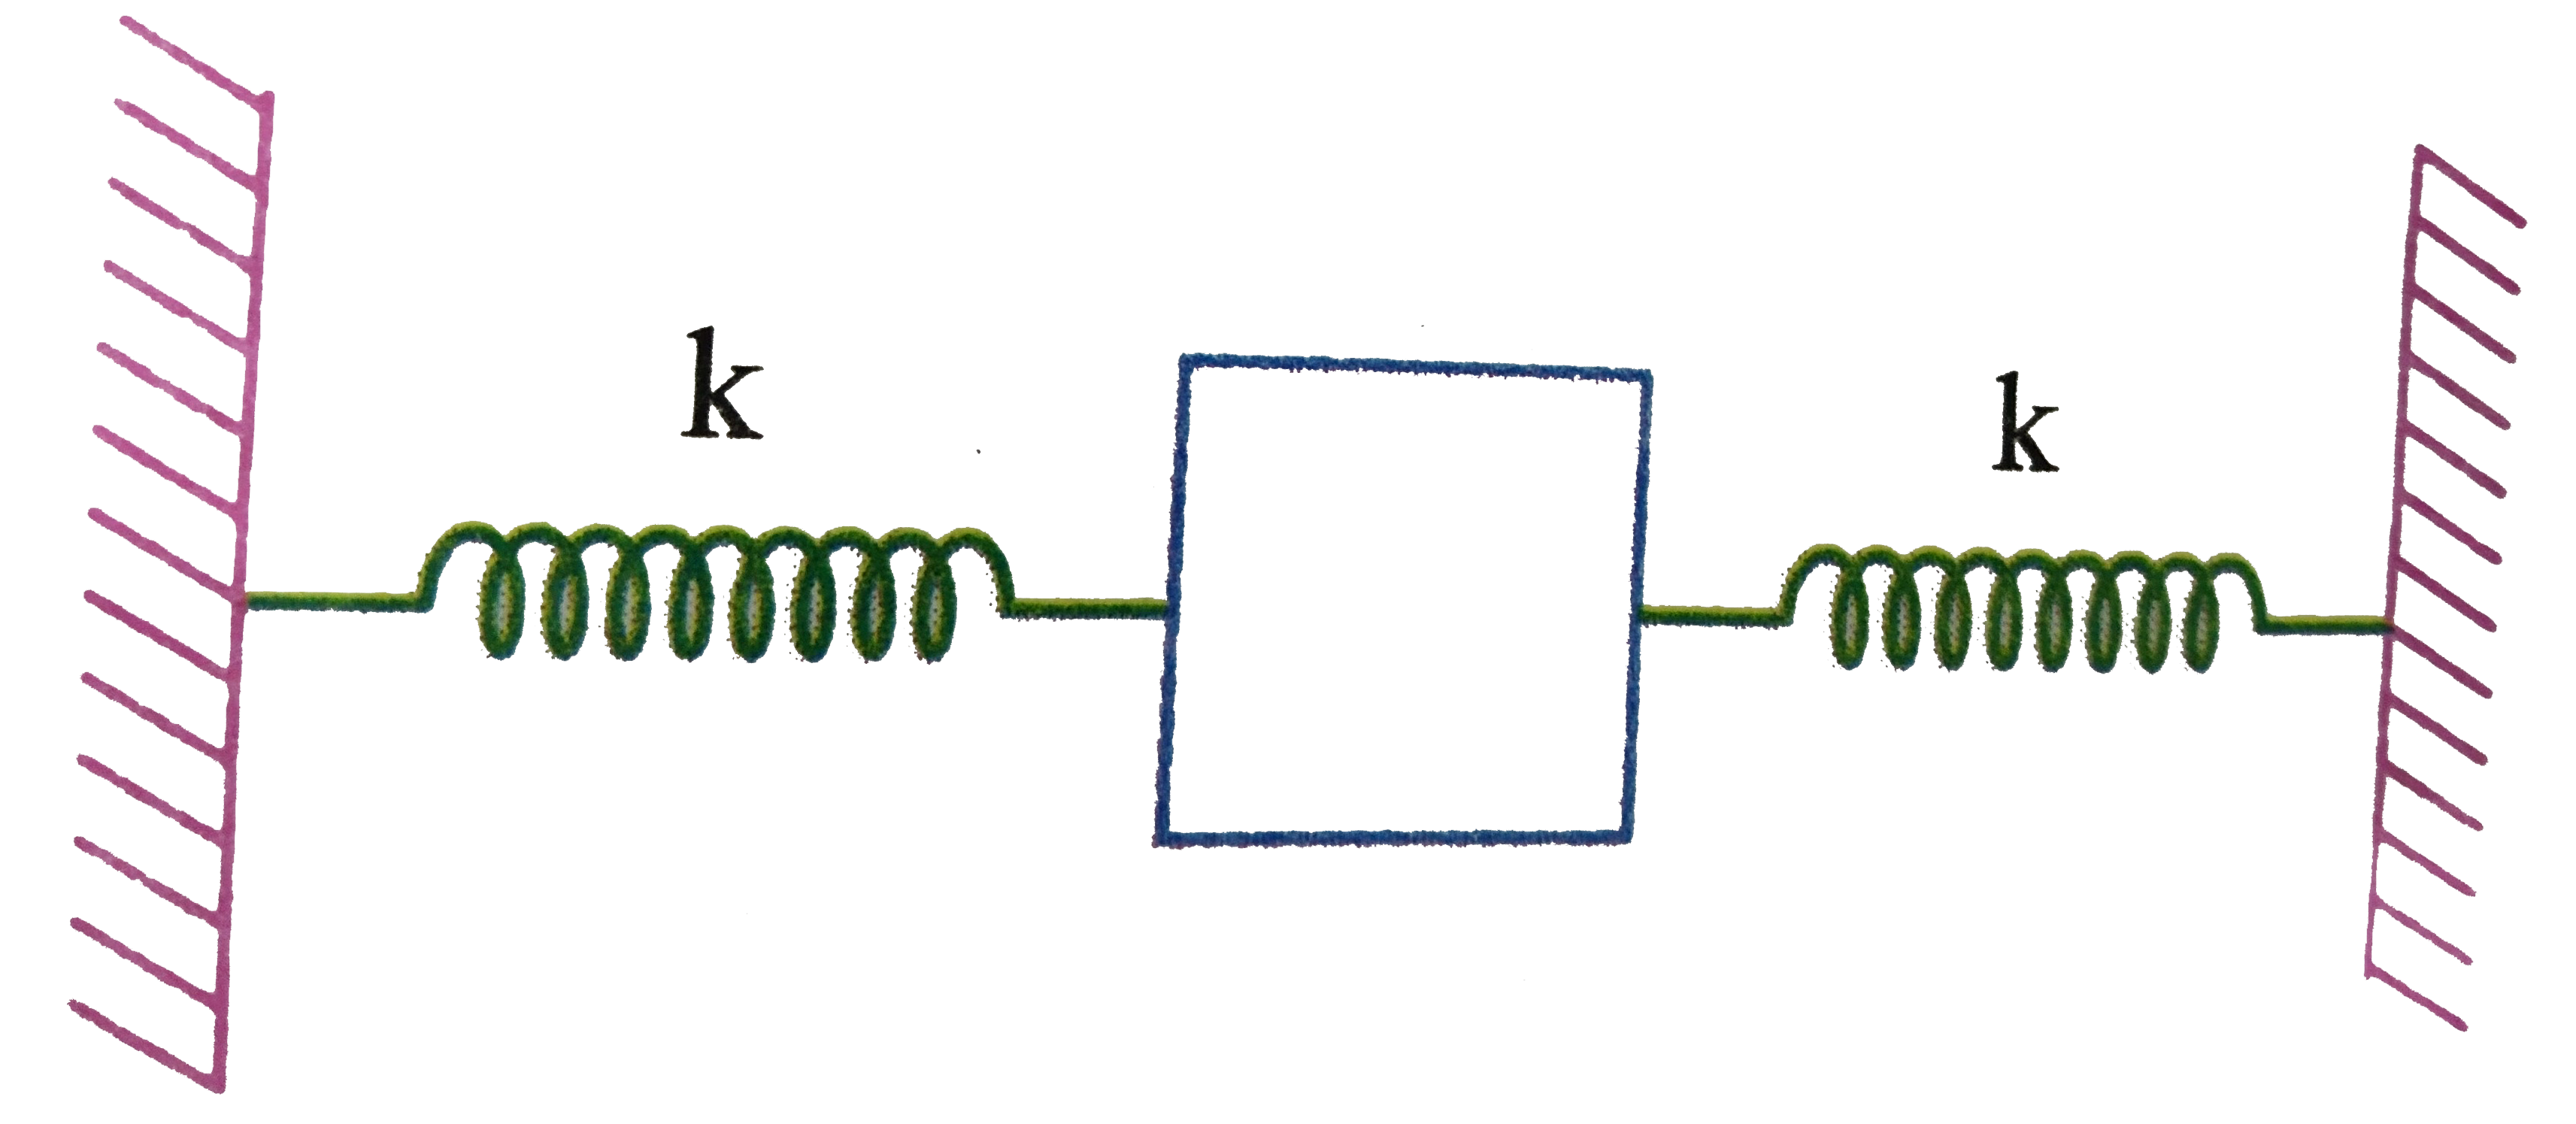 A block is tied within two spring, each having spring constant equal to k. Initially the springs are in their natural length and horizontal as shown. The block is released from rest. The springs are ideal, acceleration due to gravity is g downwards. Air resistance is to be neglect. The natural length of spring is l(0).       If the decrease in height of the block till it reaches equilibrium is sqrt(3l(0)) then the mass of the block is: